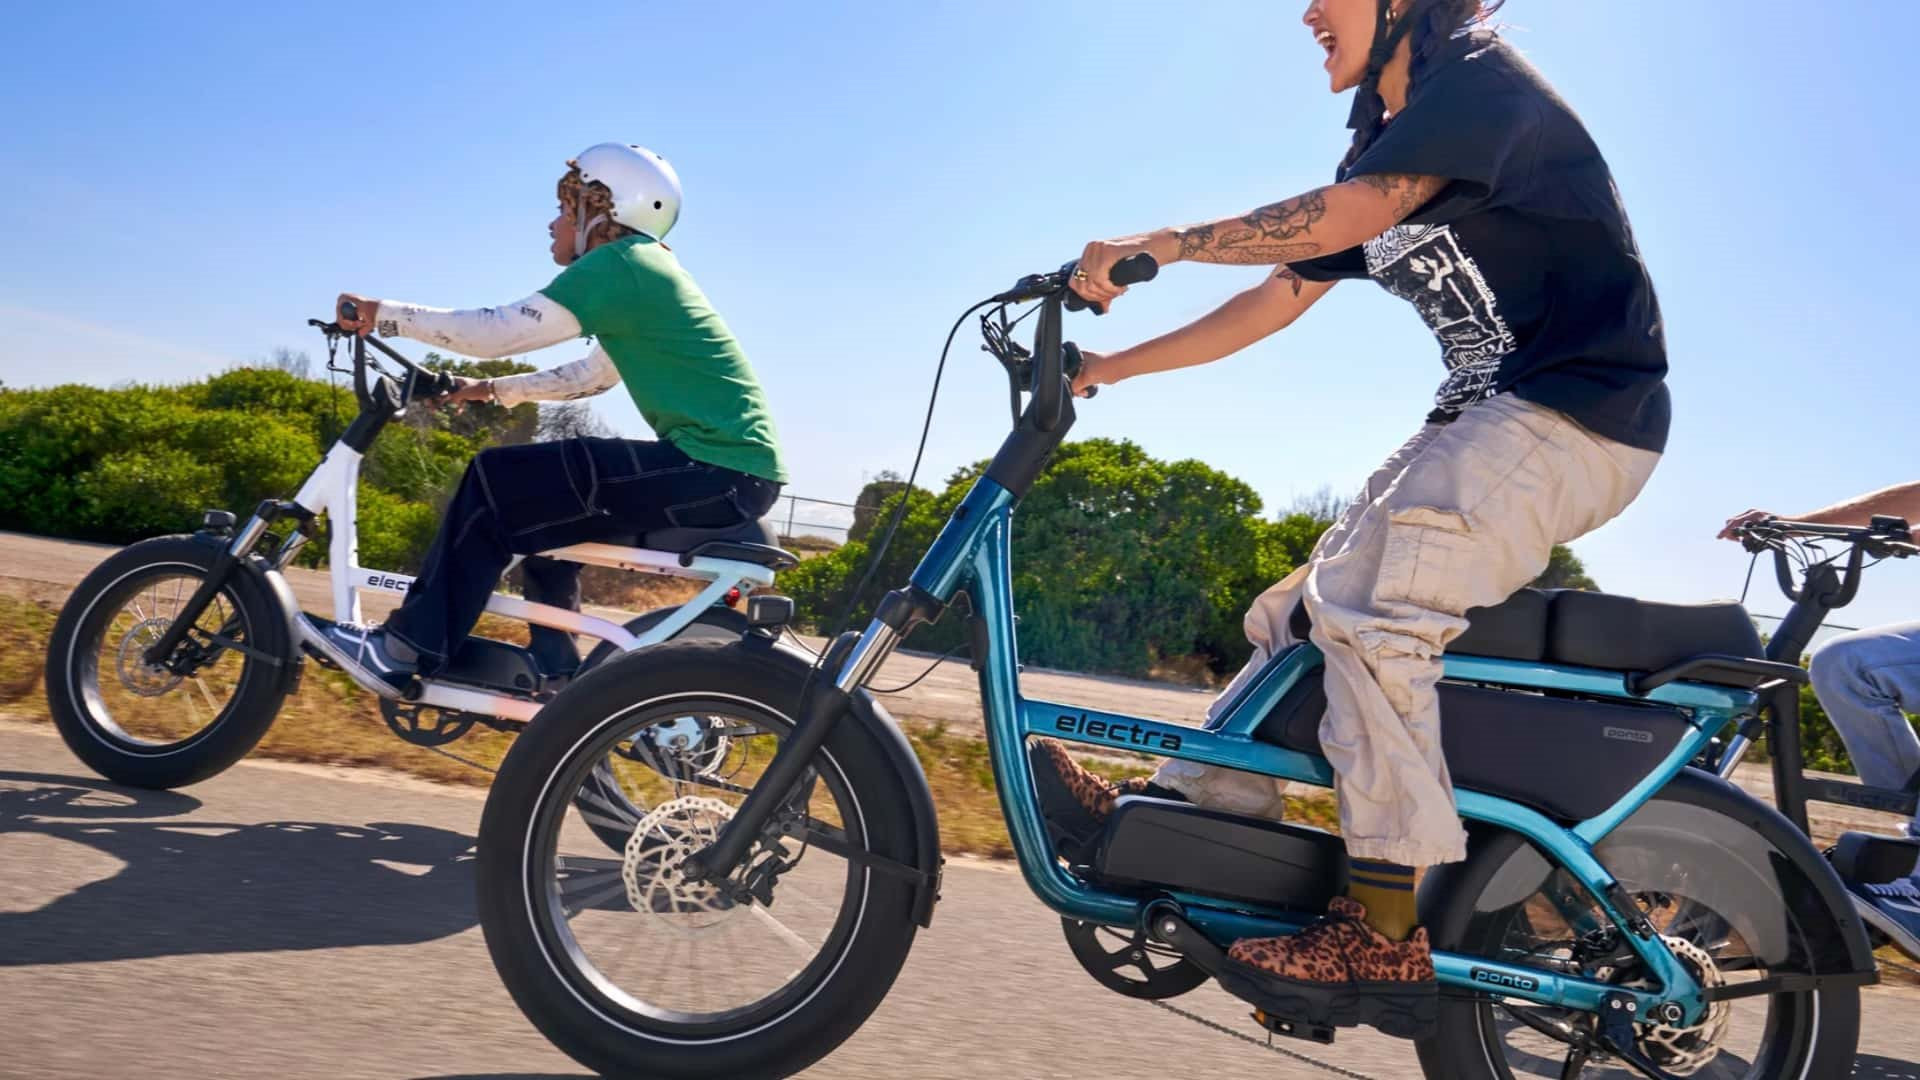 new-electra-ponto-go-from-trek-is-a-city-e-bike-for-you-and-a-passenger.jpg